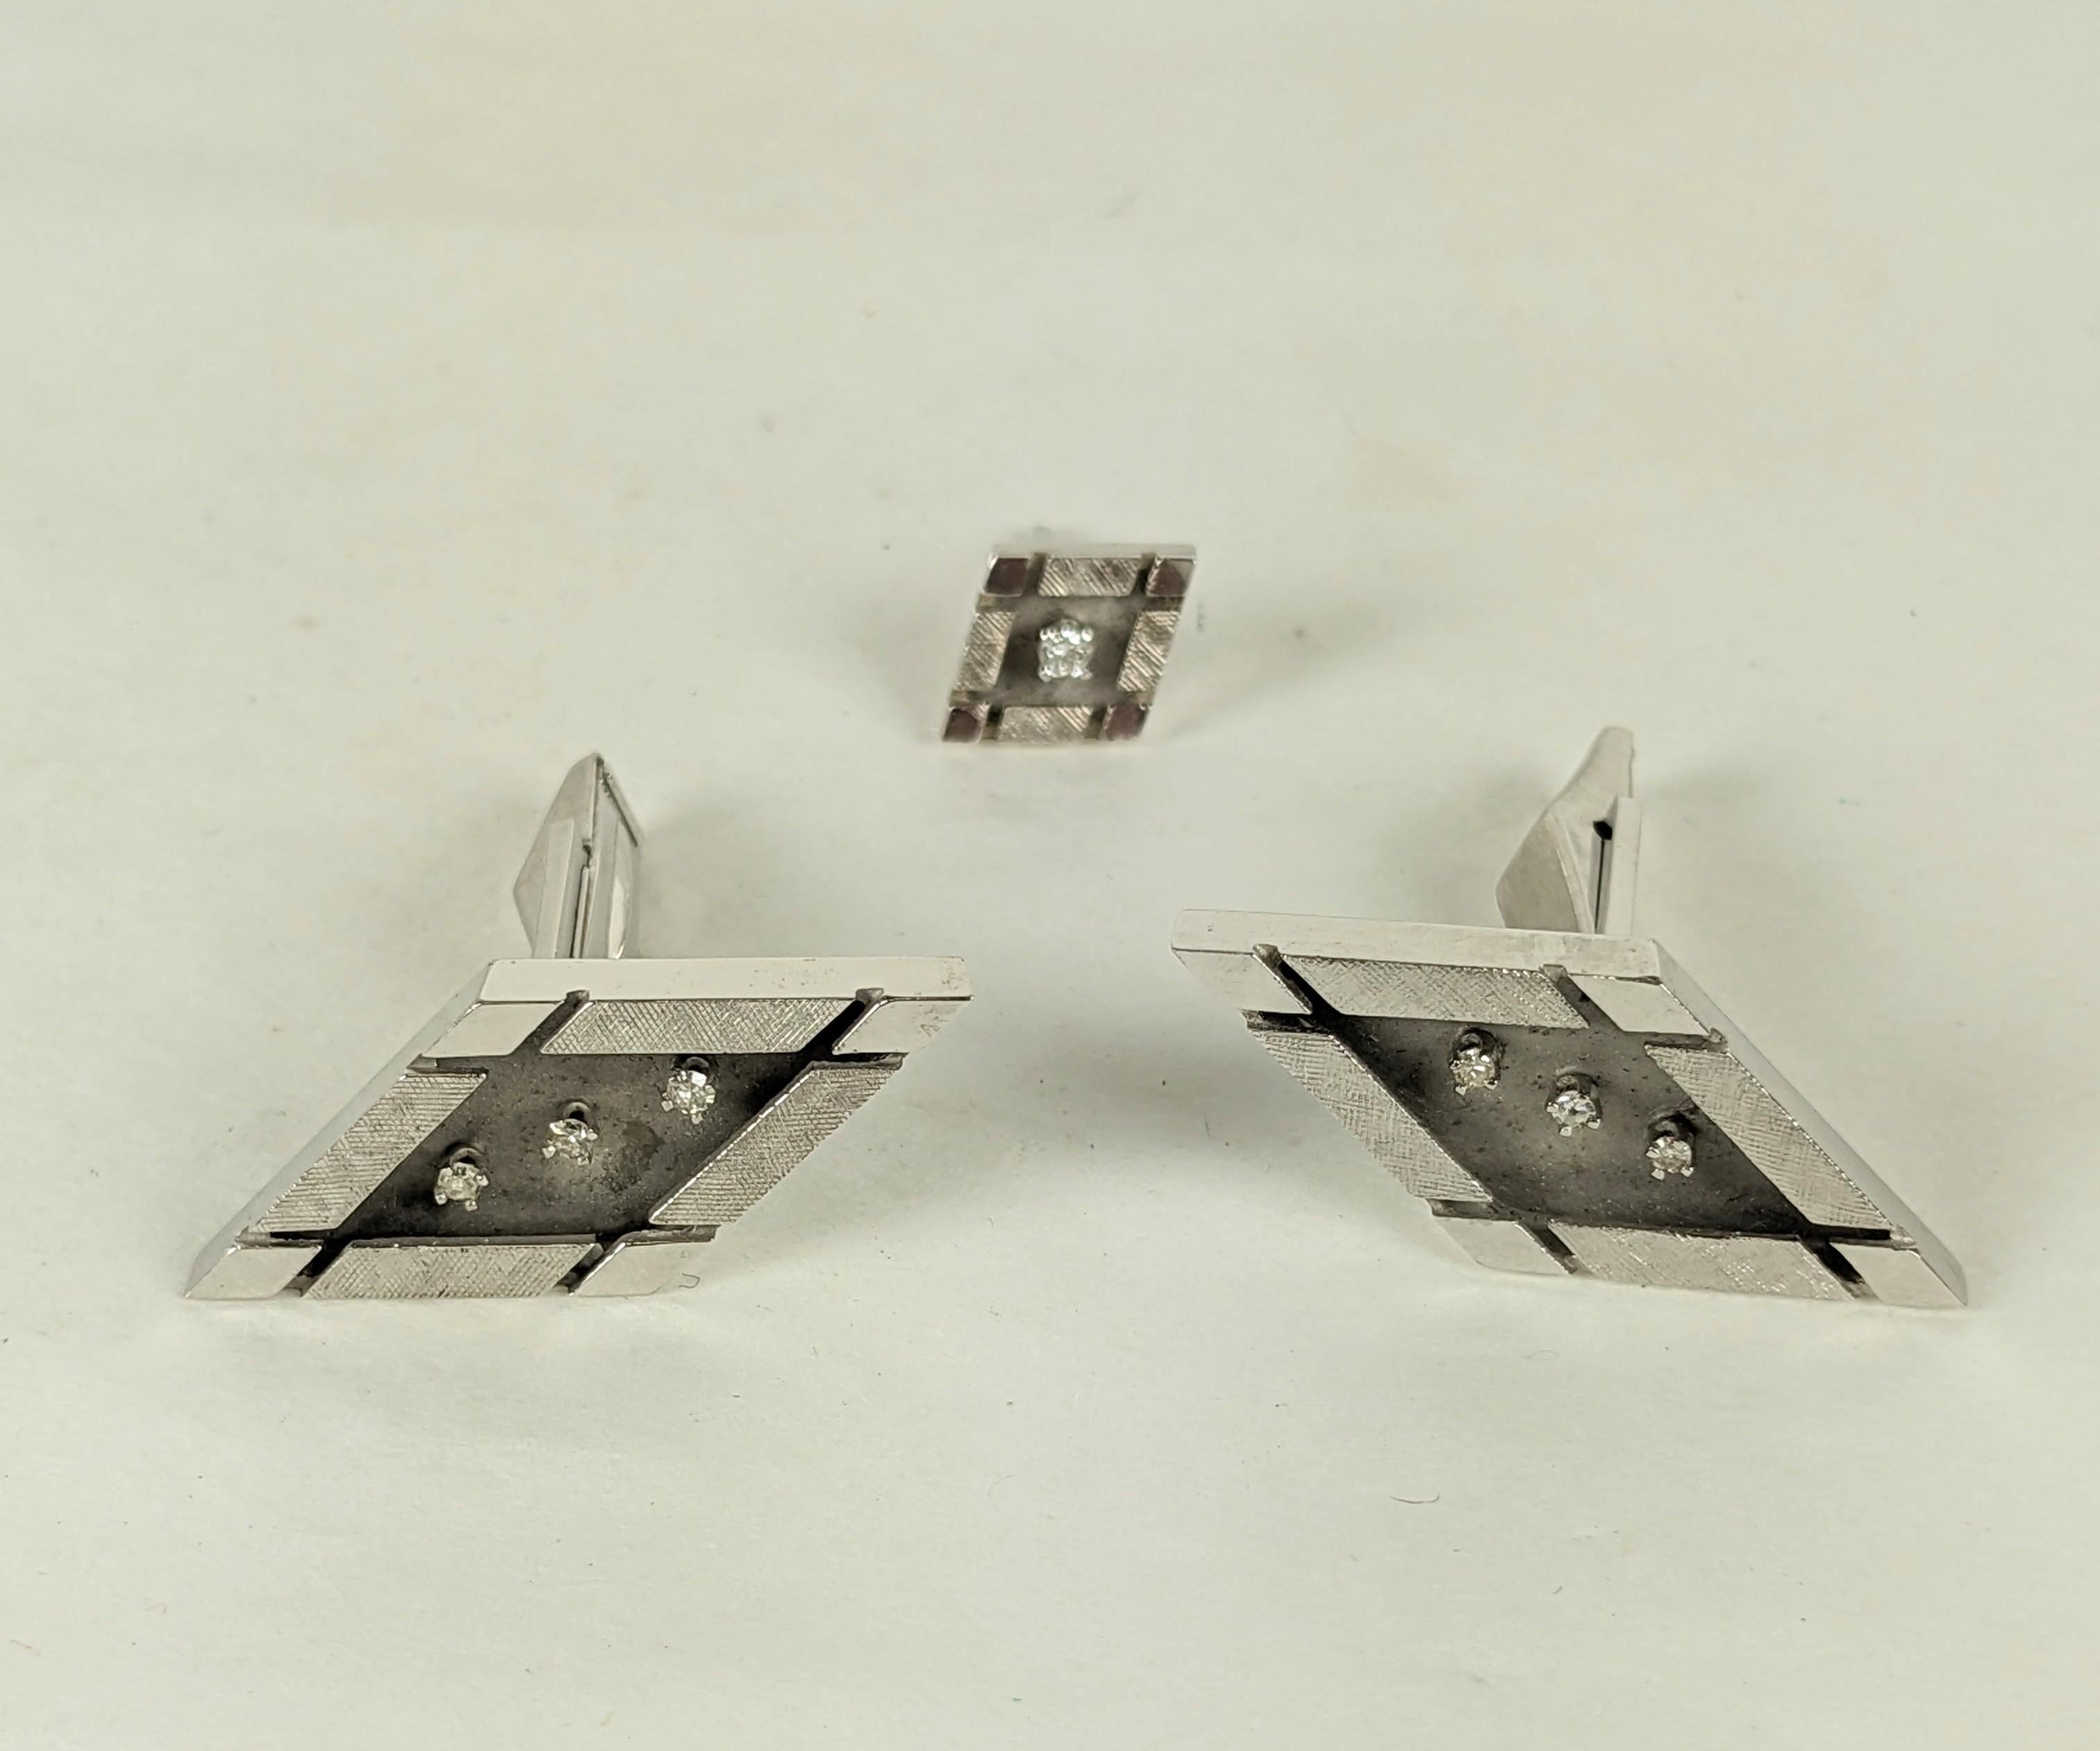 Elegant White Gold Diamond Modernist Cufflink Set from the 1960's. Textured and high polished 14k white gold contrast in the diamond shape with diamond accents and hard shank swivel finding. Matching tie tac as well. Each measures 1.25